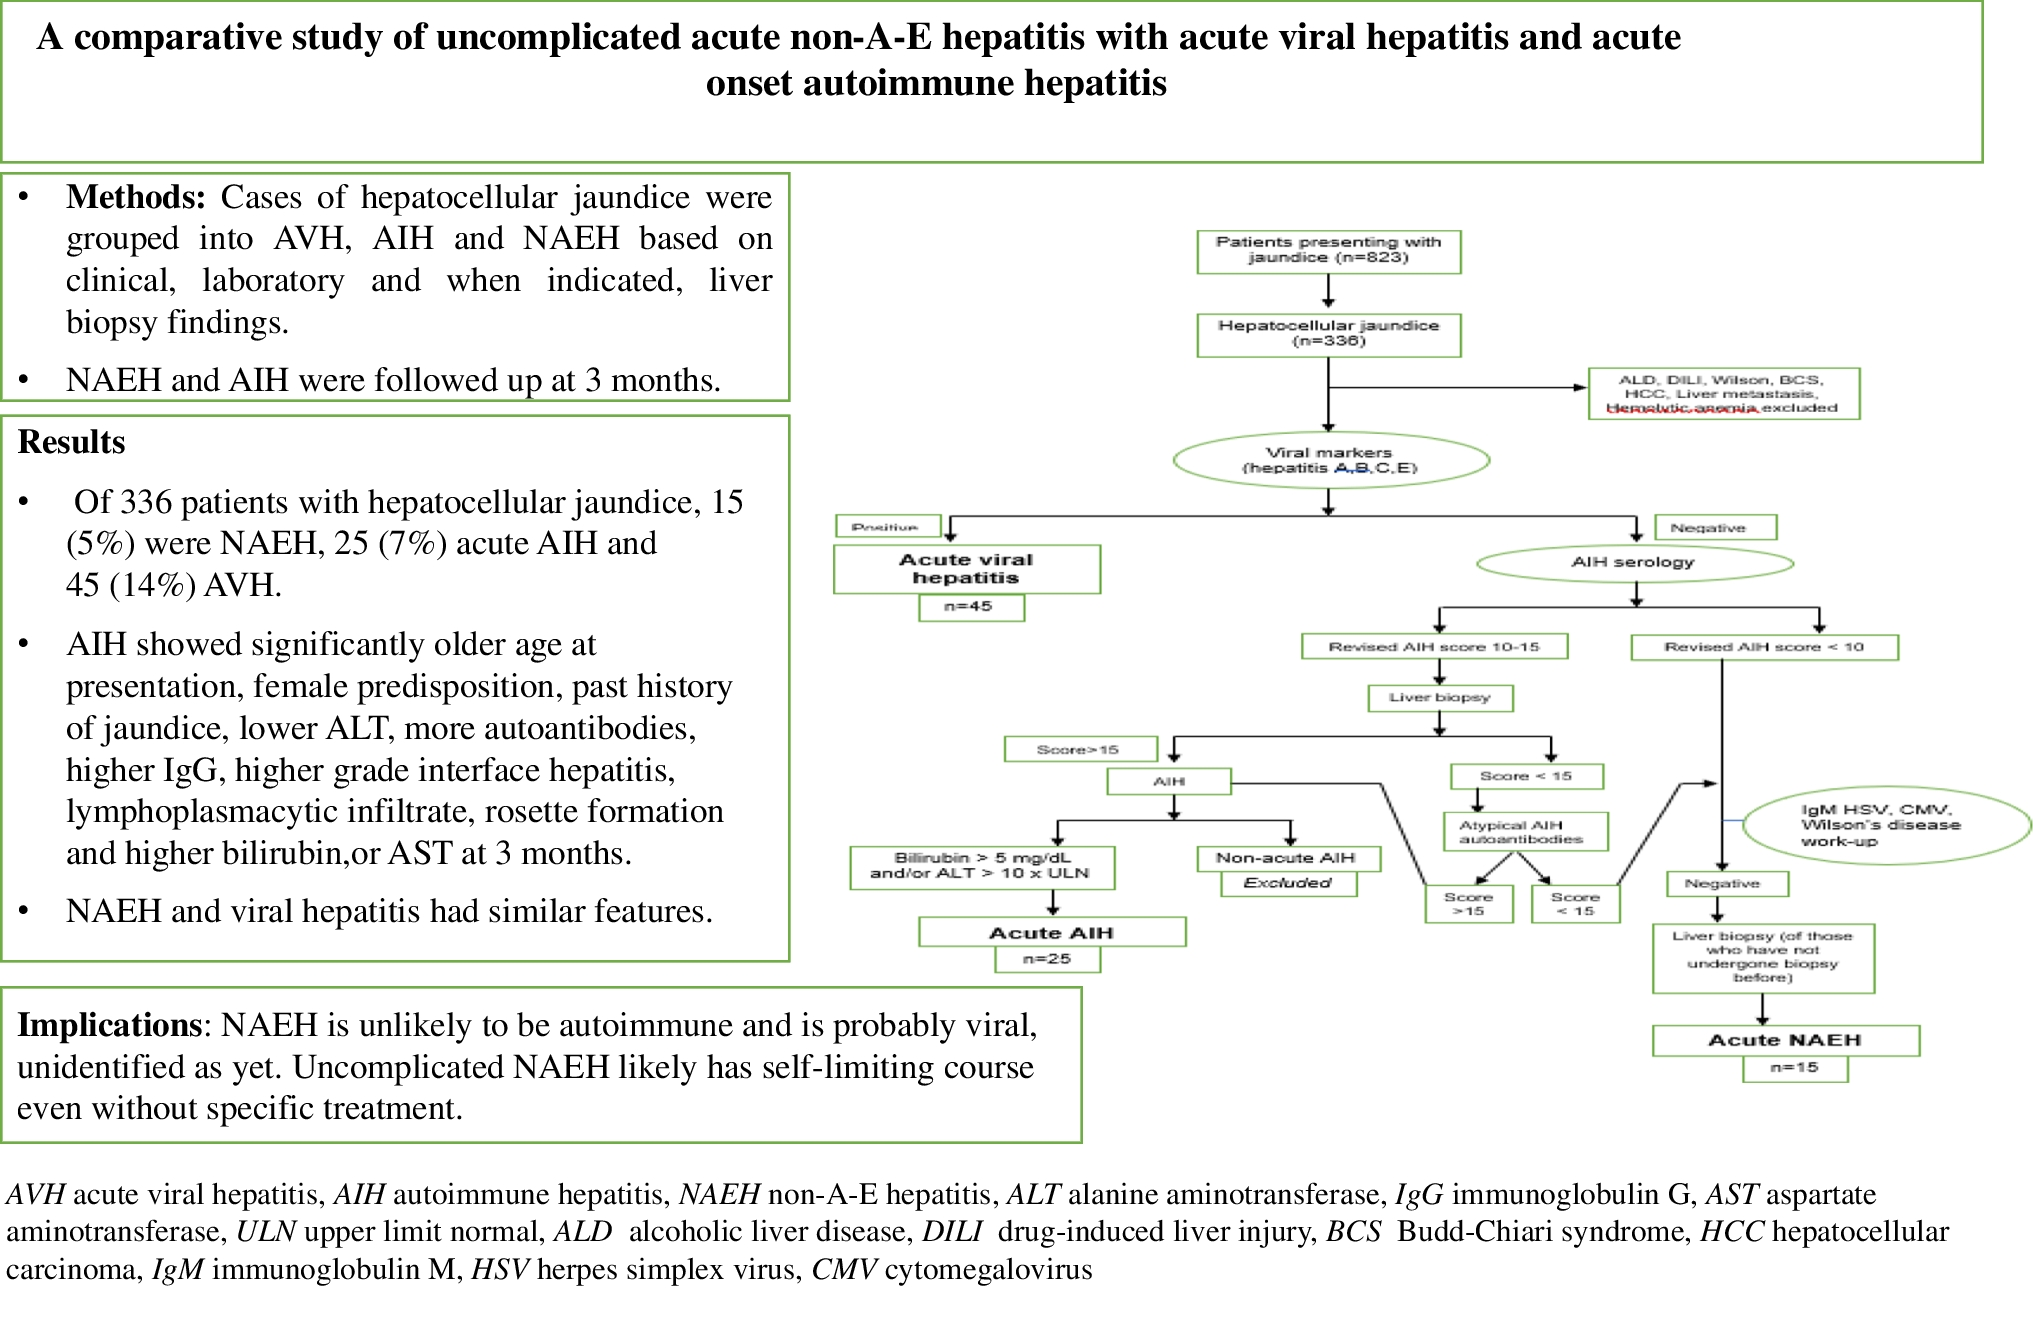 A comparative study of uncomplicated acute non-A-E hepatitis with acute viral hepatitis and acute onset autoimmune hepatitis